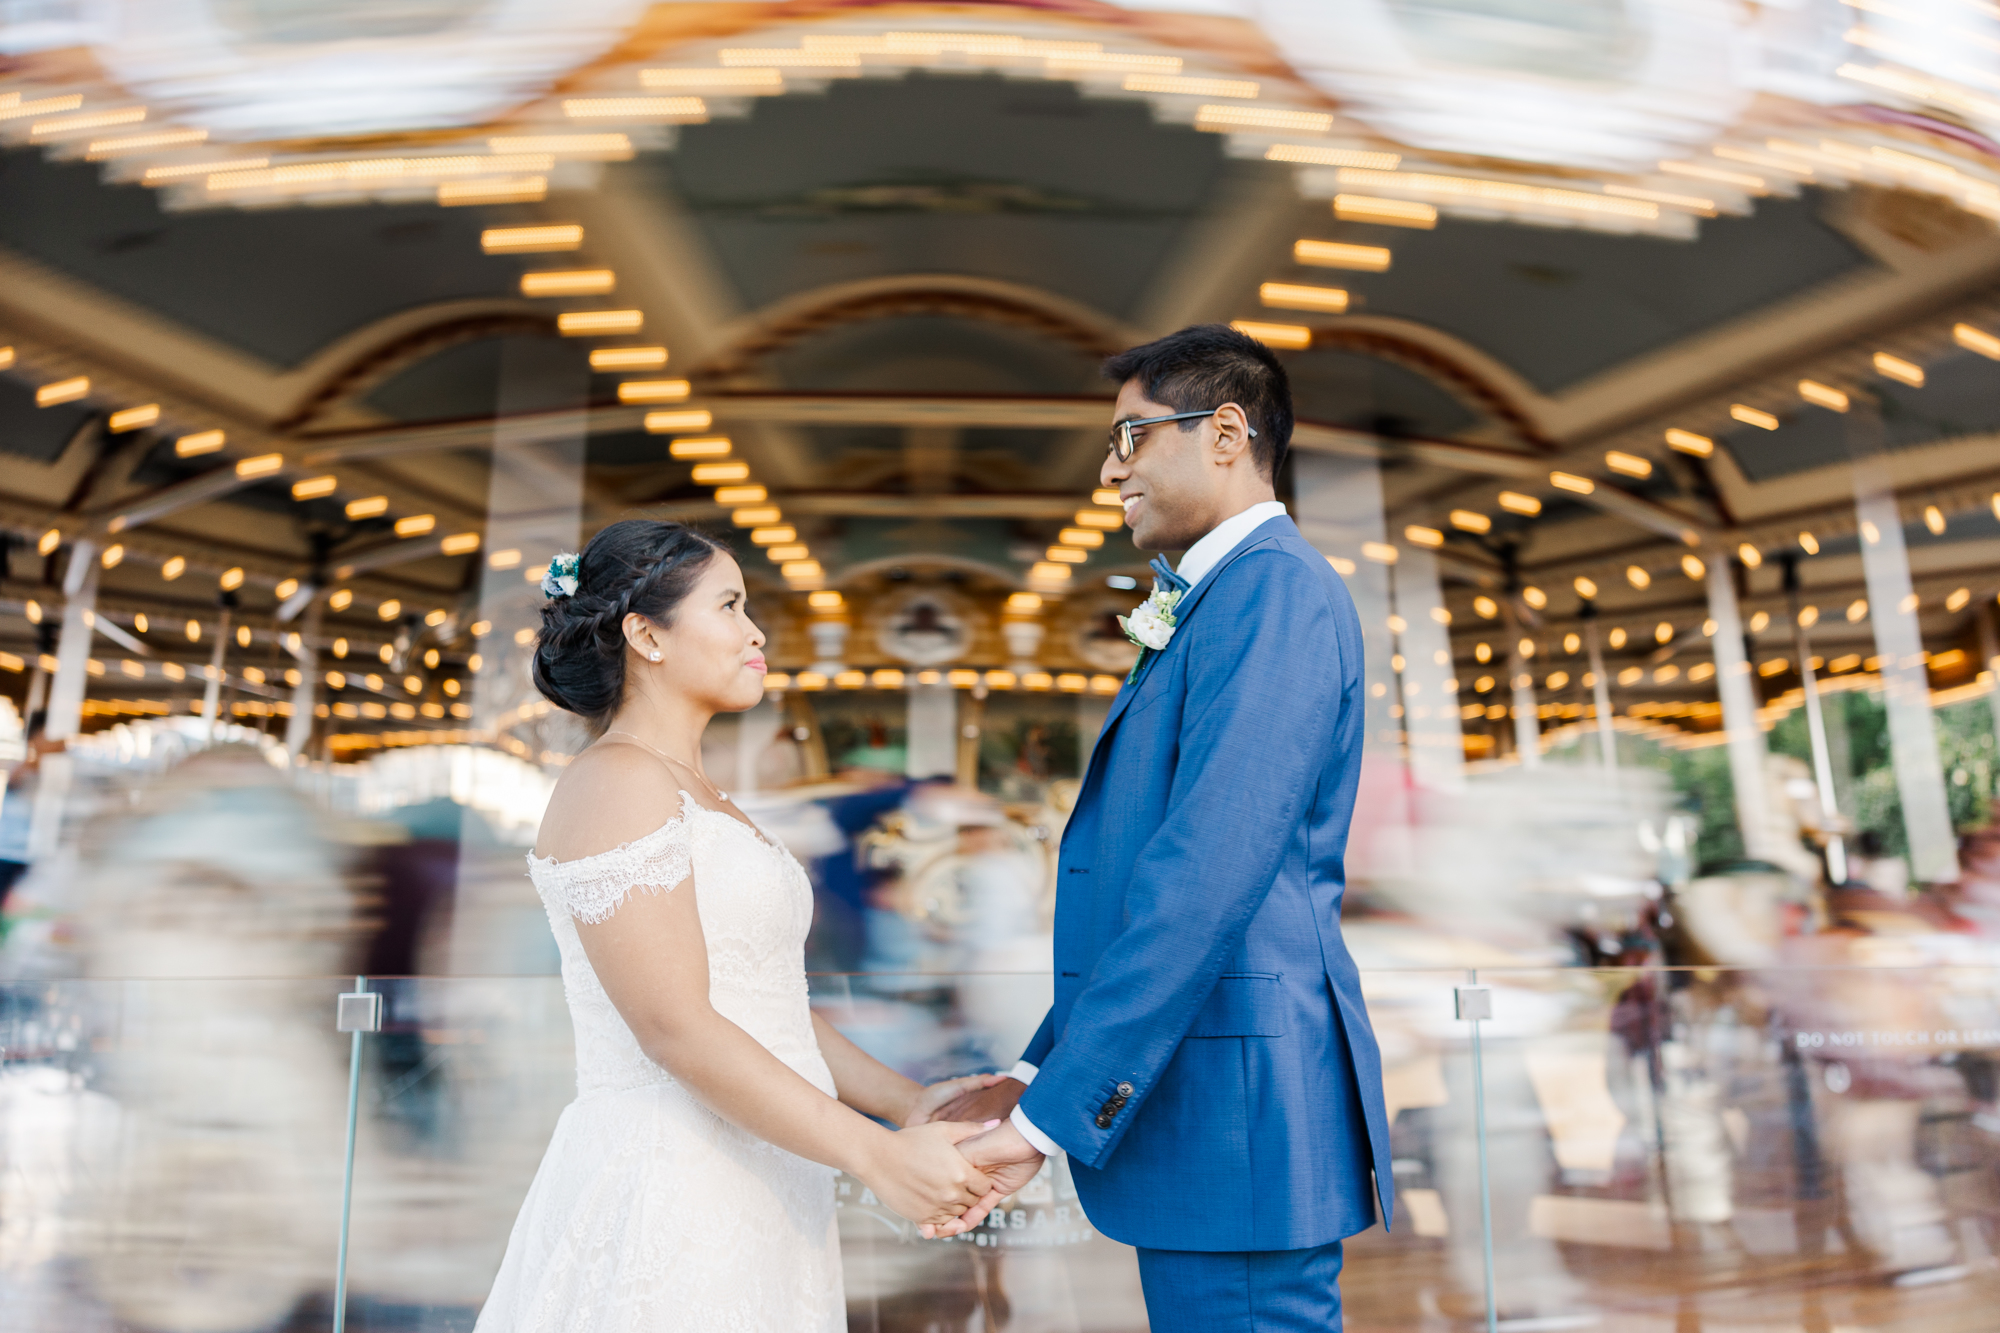 Bright Jane's Carousel Elopement at Sunset